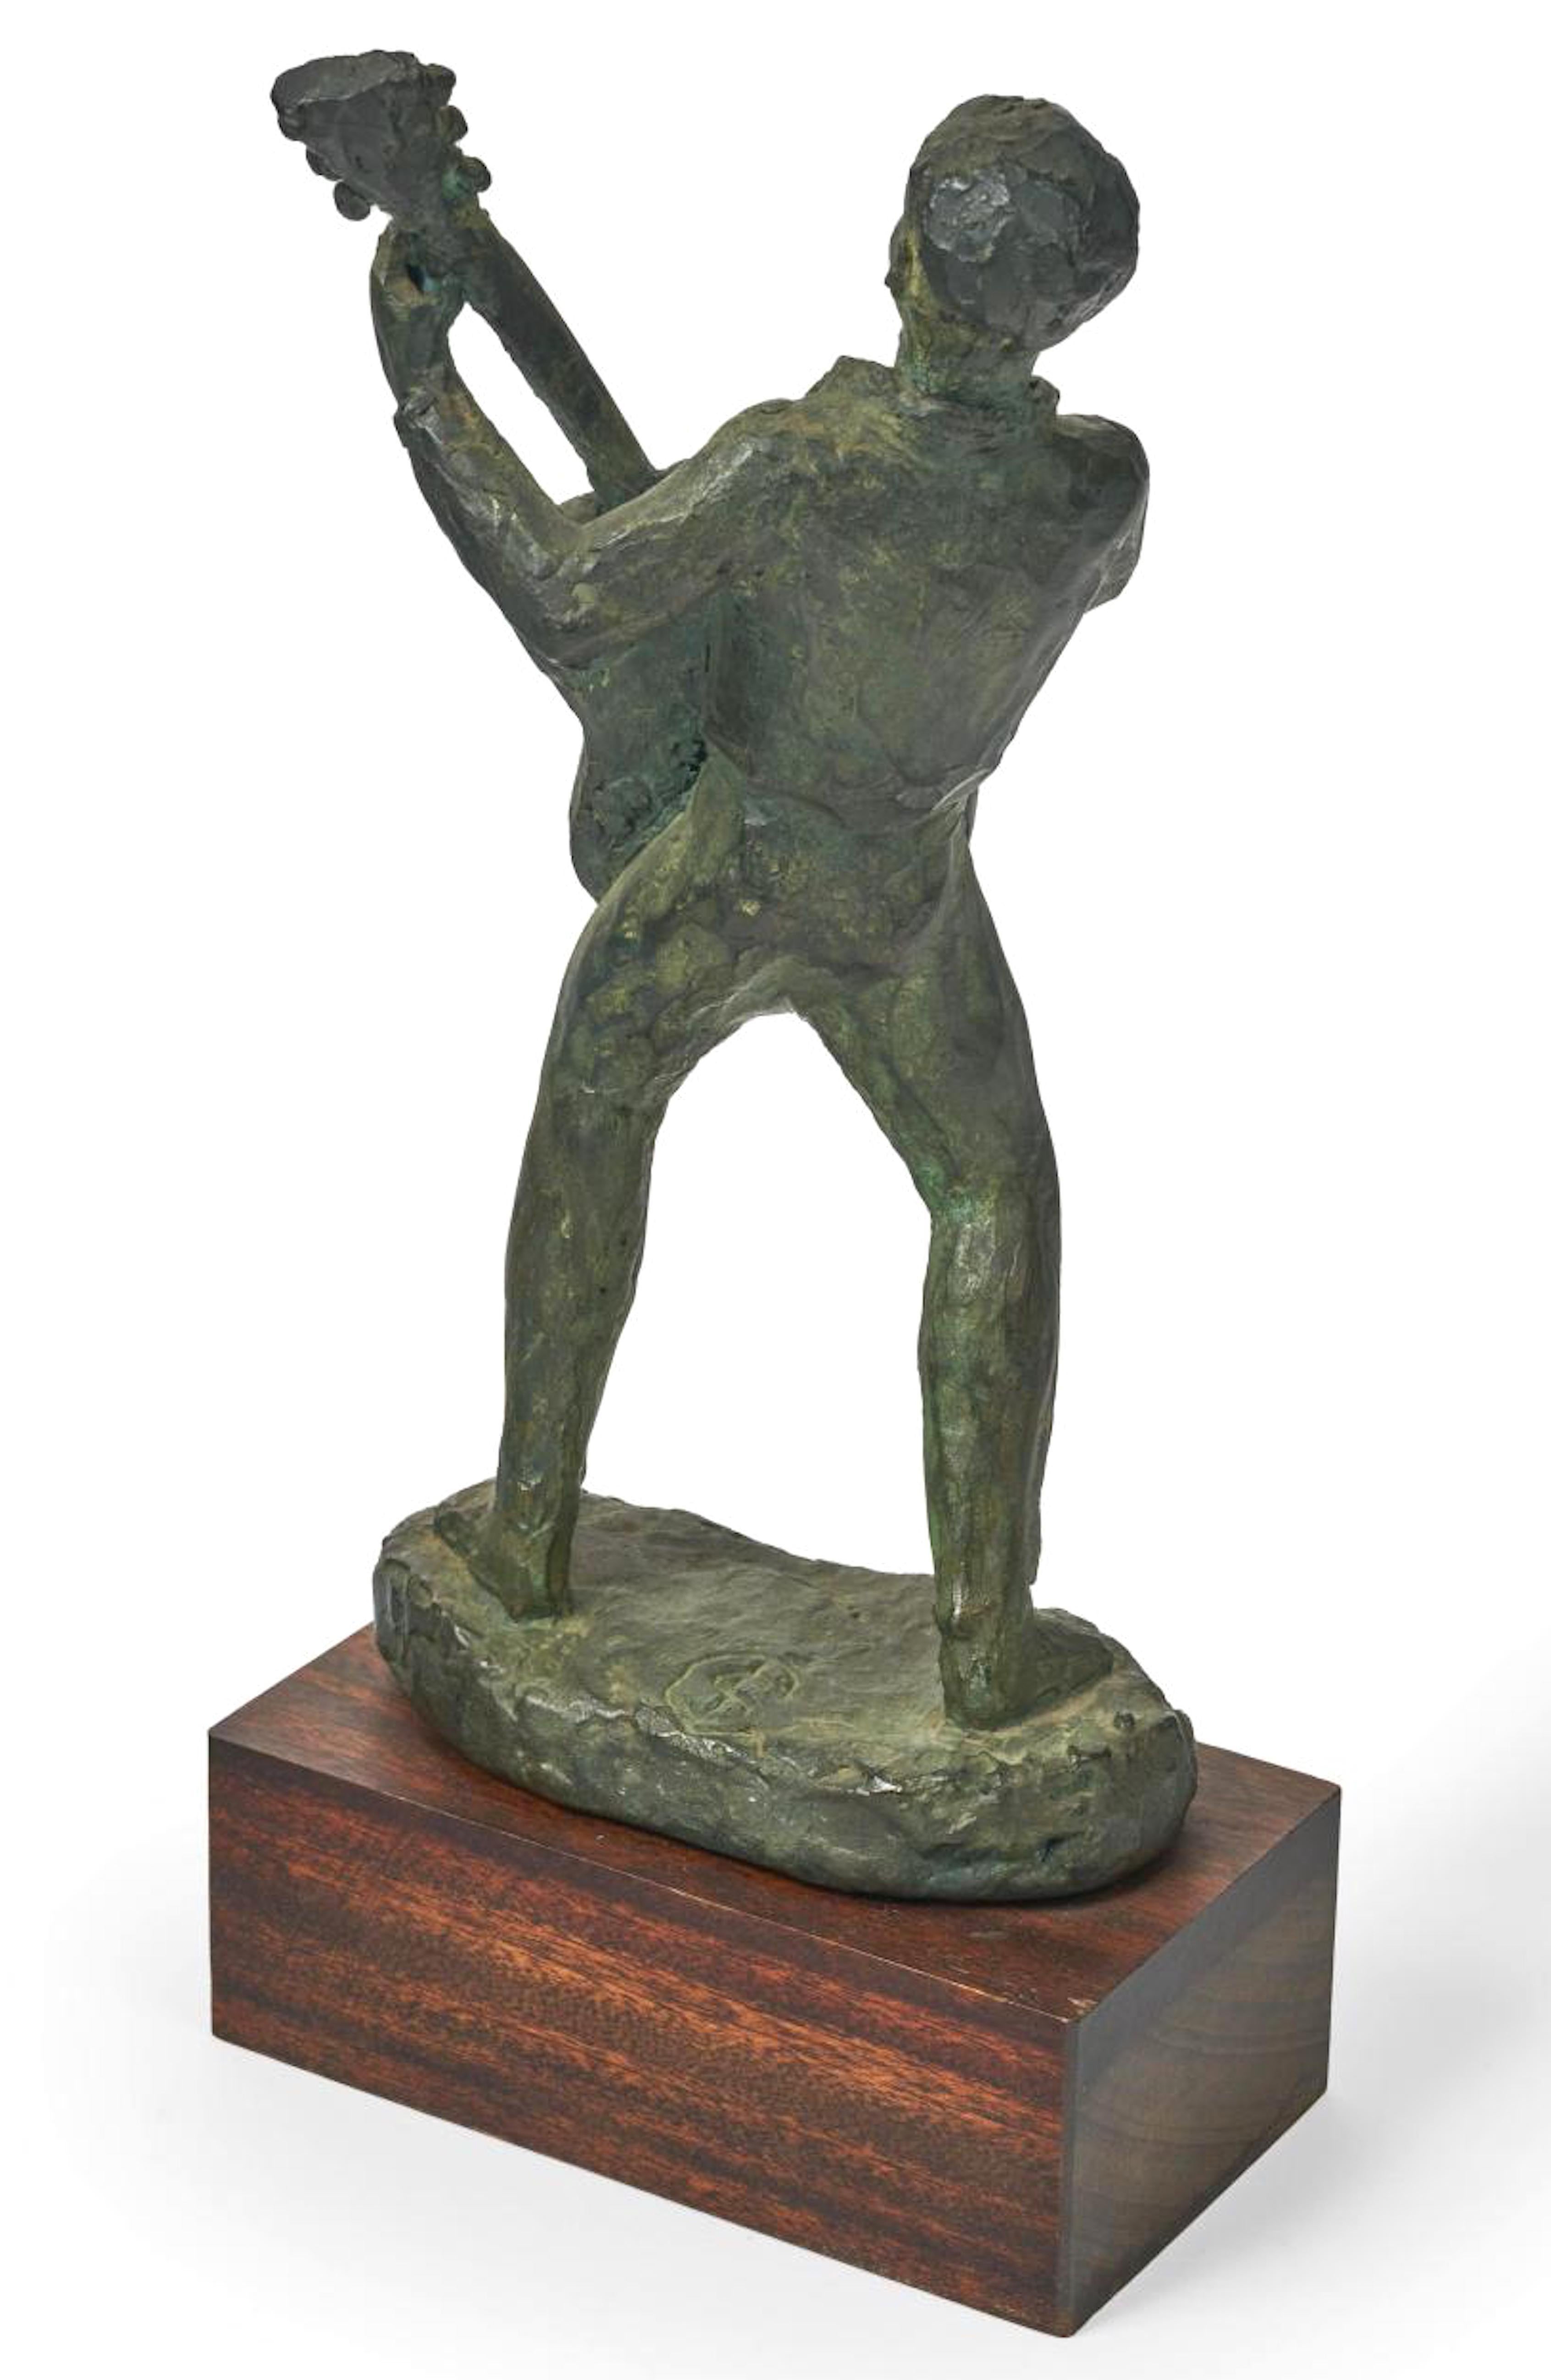 Rocking Out - Sculpture by Unknown